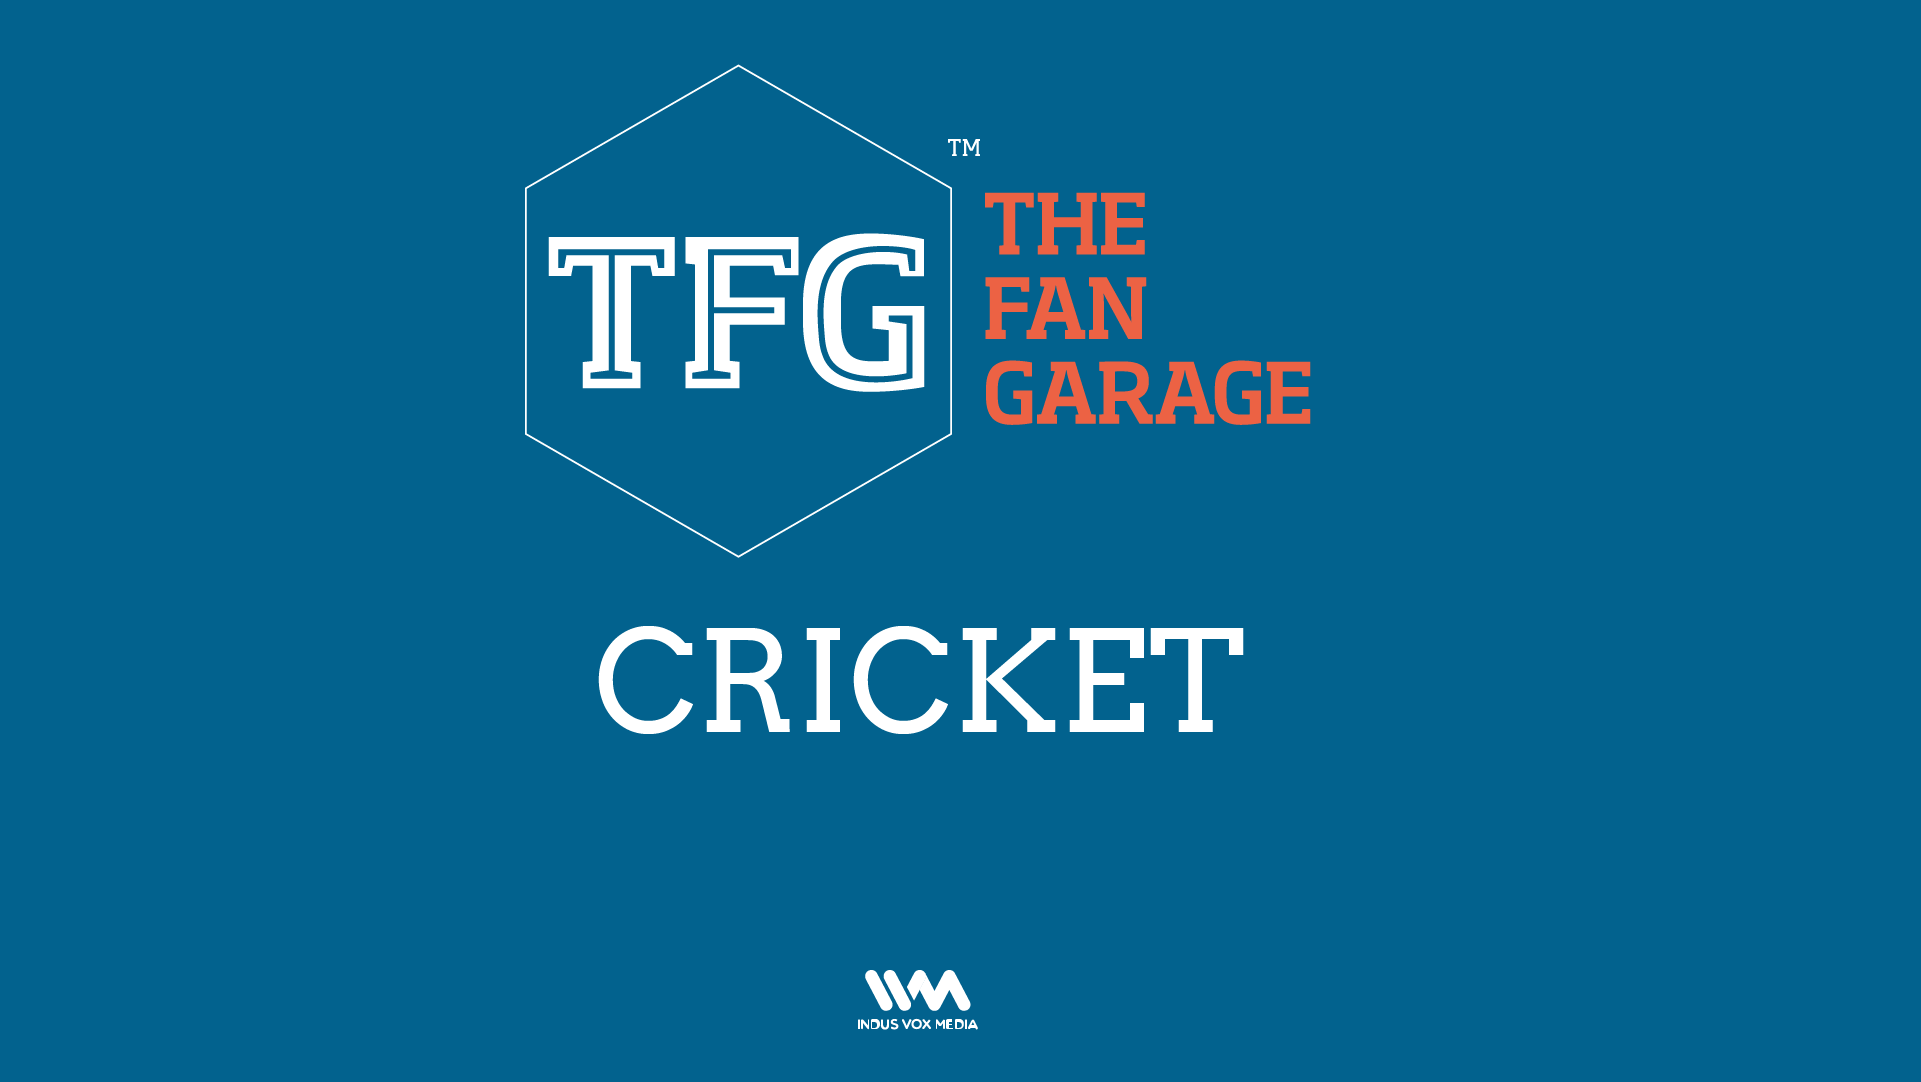 TFG Cricket Ep. 007:  Bad loser Shastri's disparaging comments unlikely to see retaliation from Ganguly